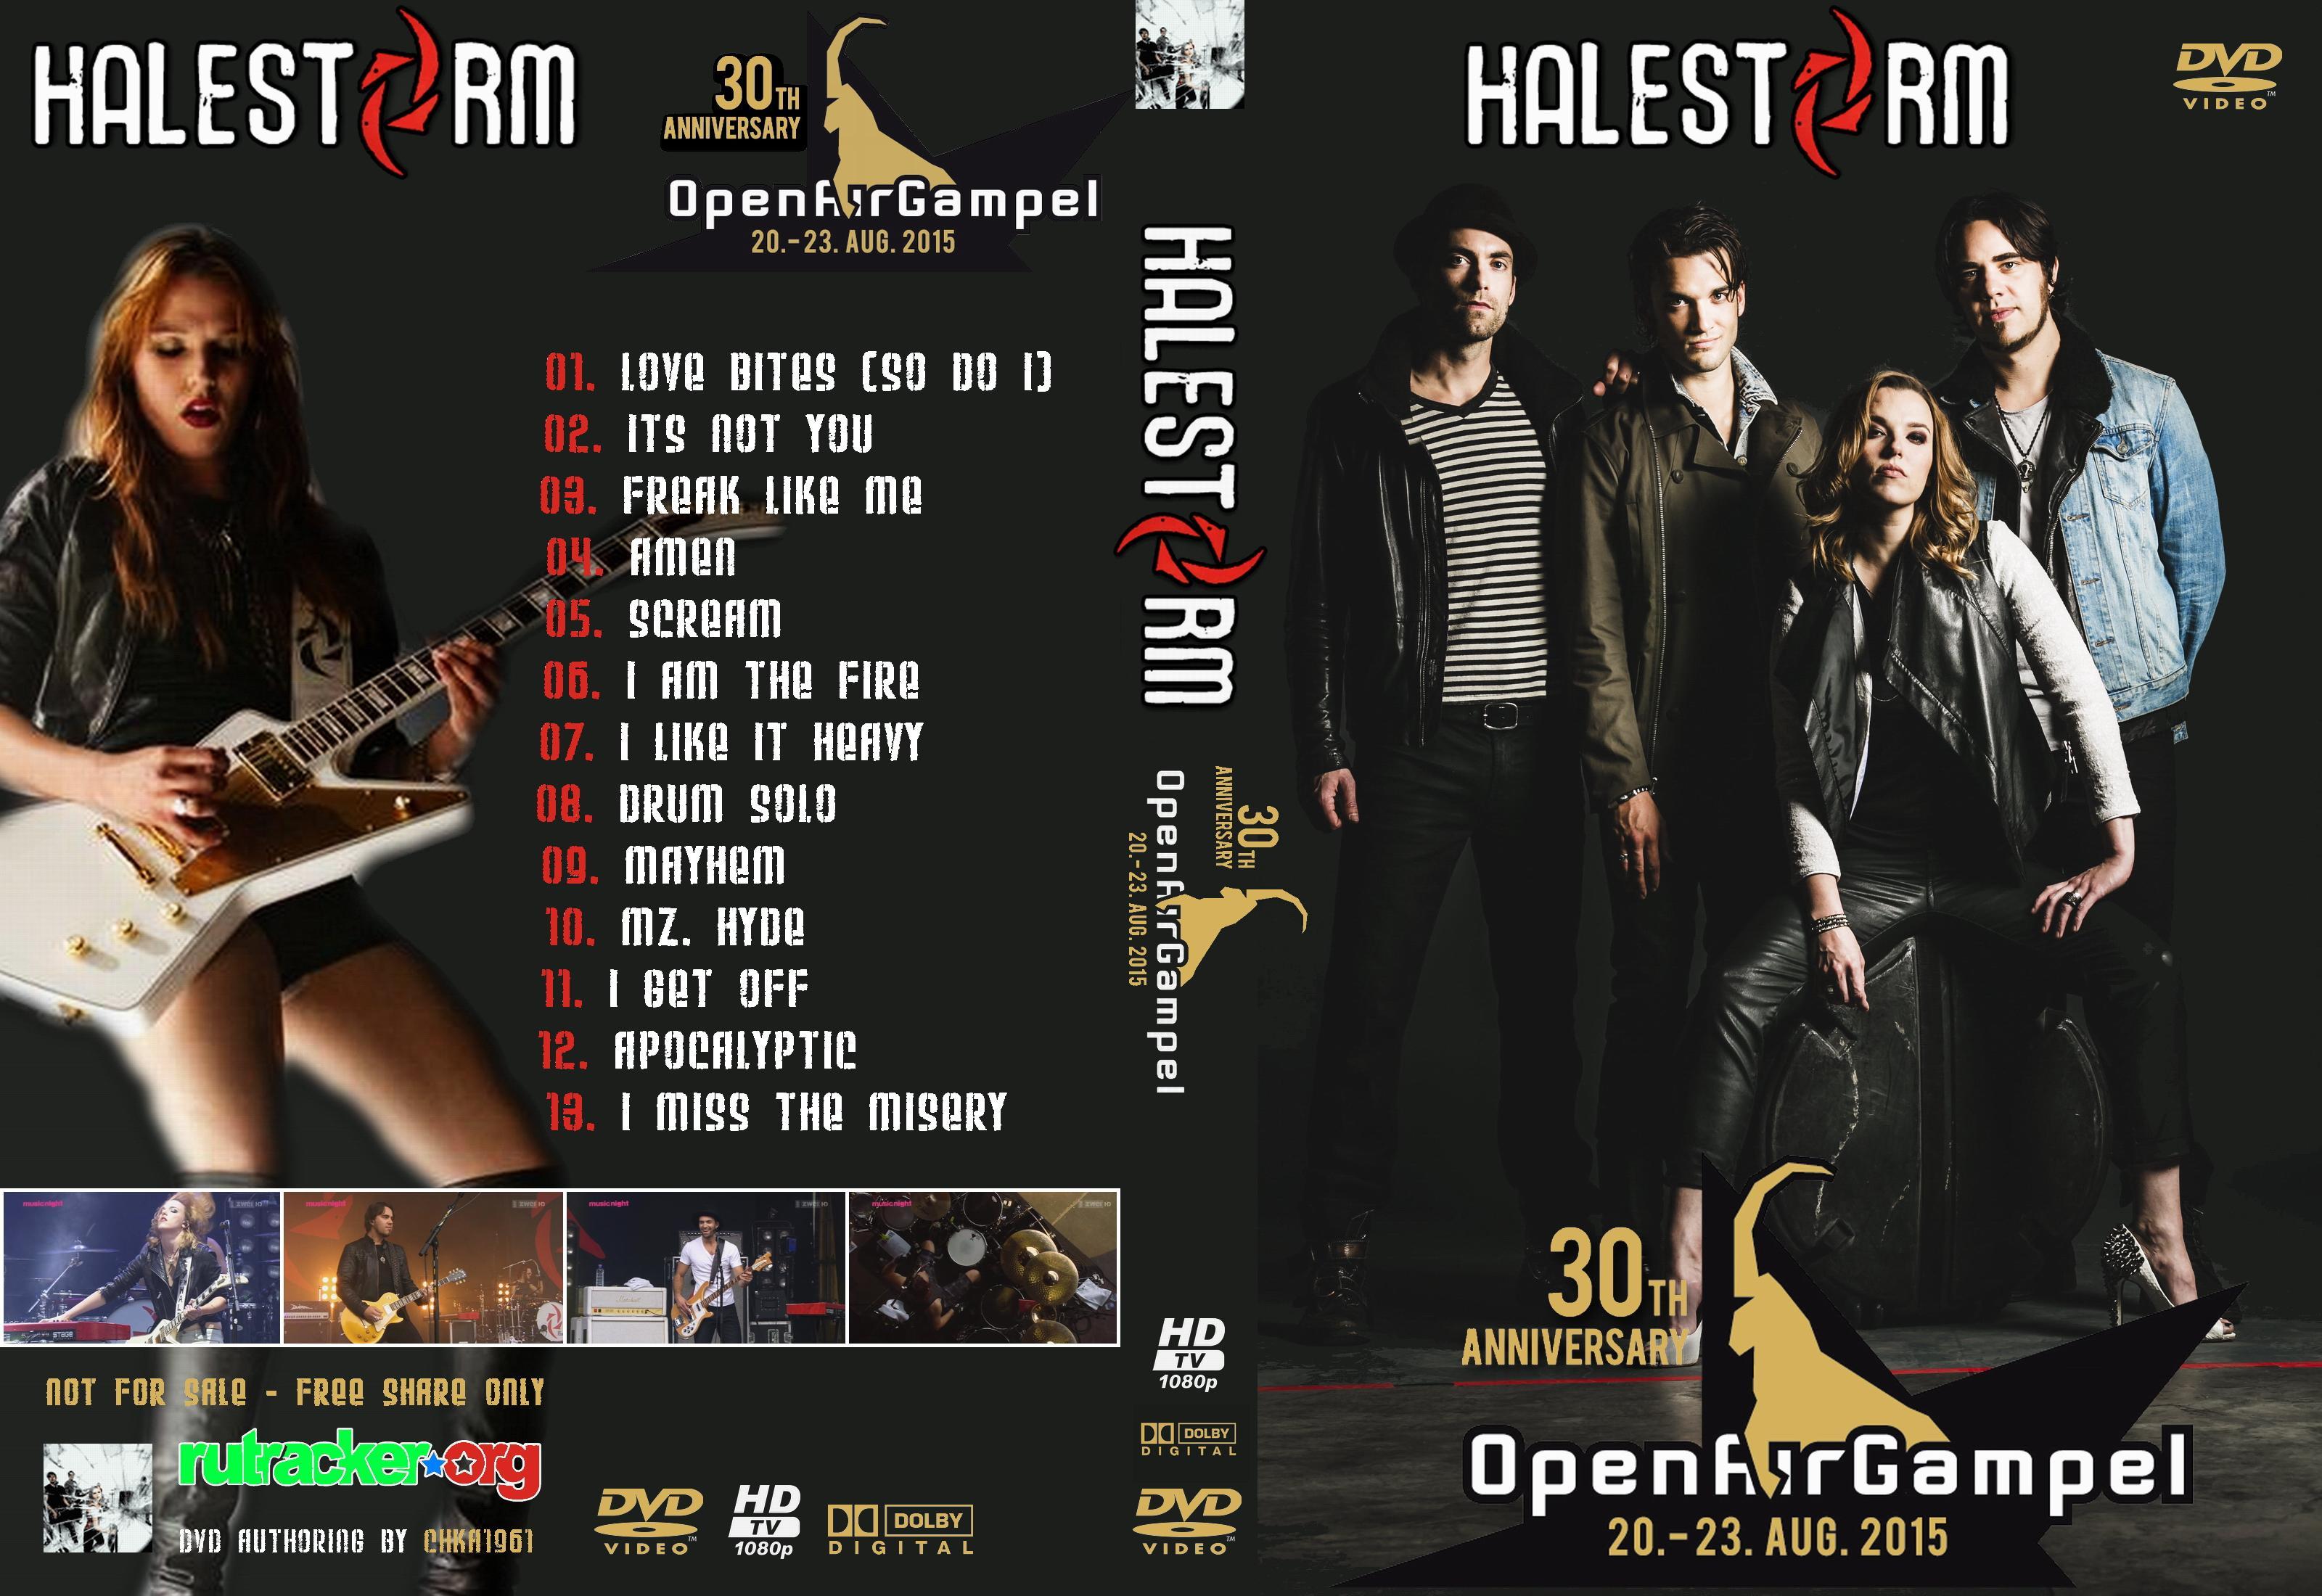 Covers Box Sk Halestorm Open Air Gampel 2015 2016 High Quality Dvd Blueray Movie